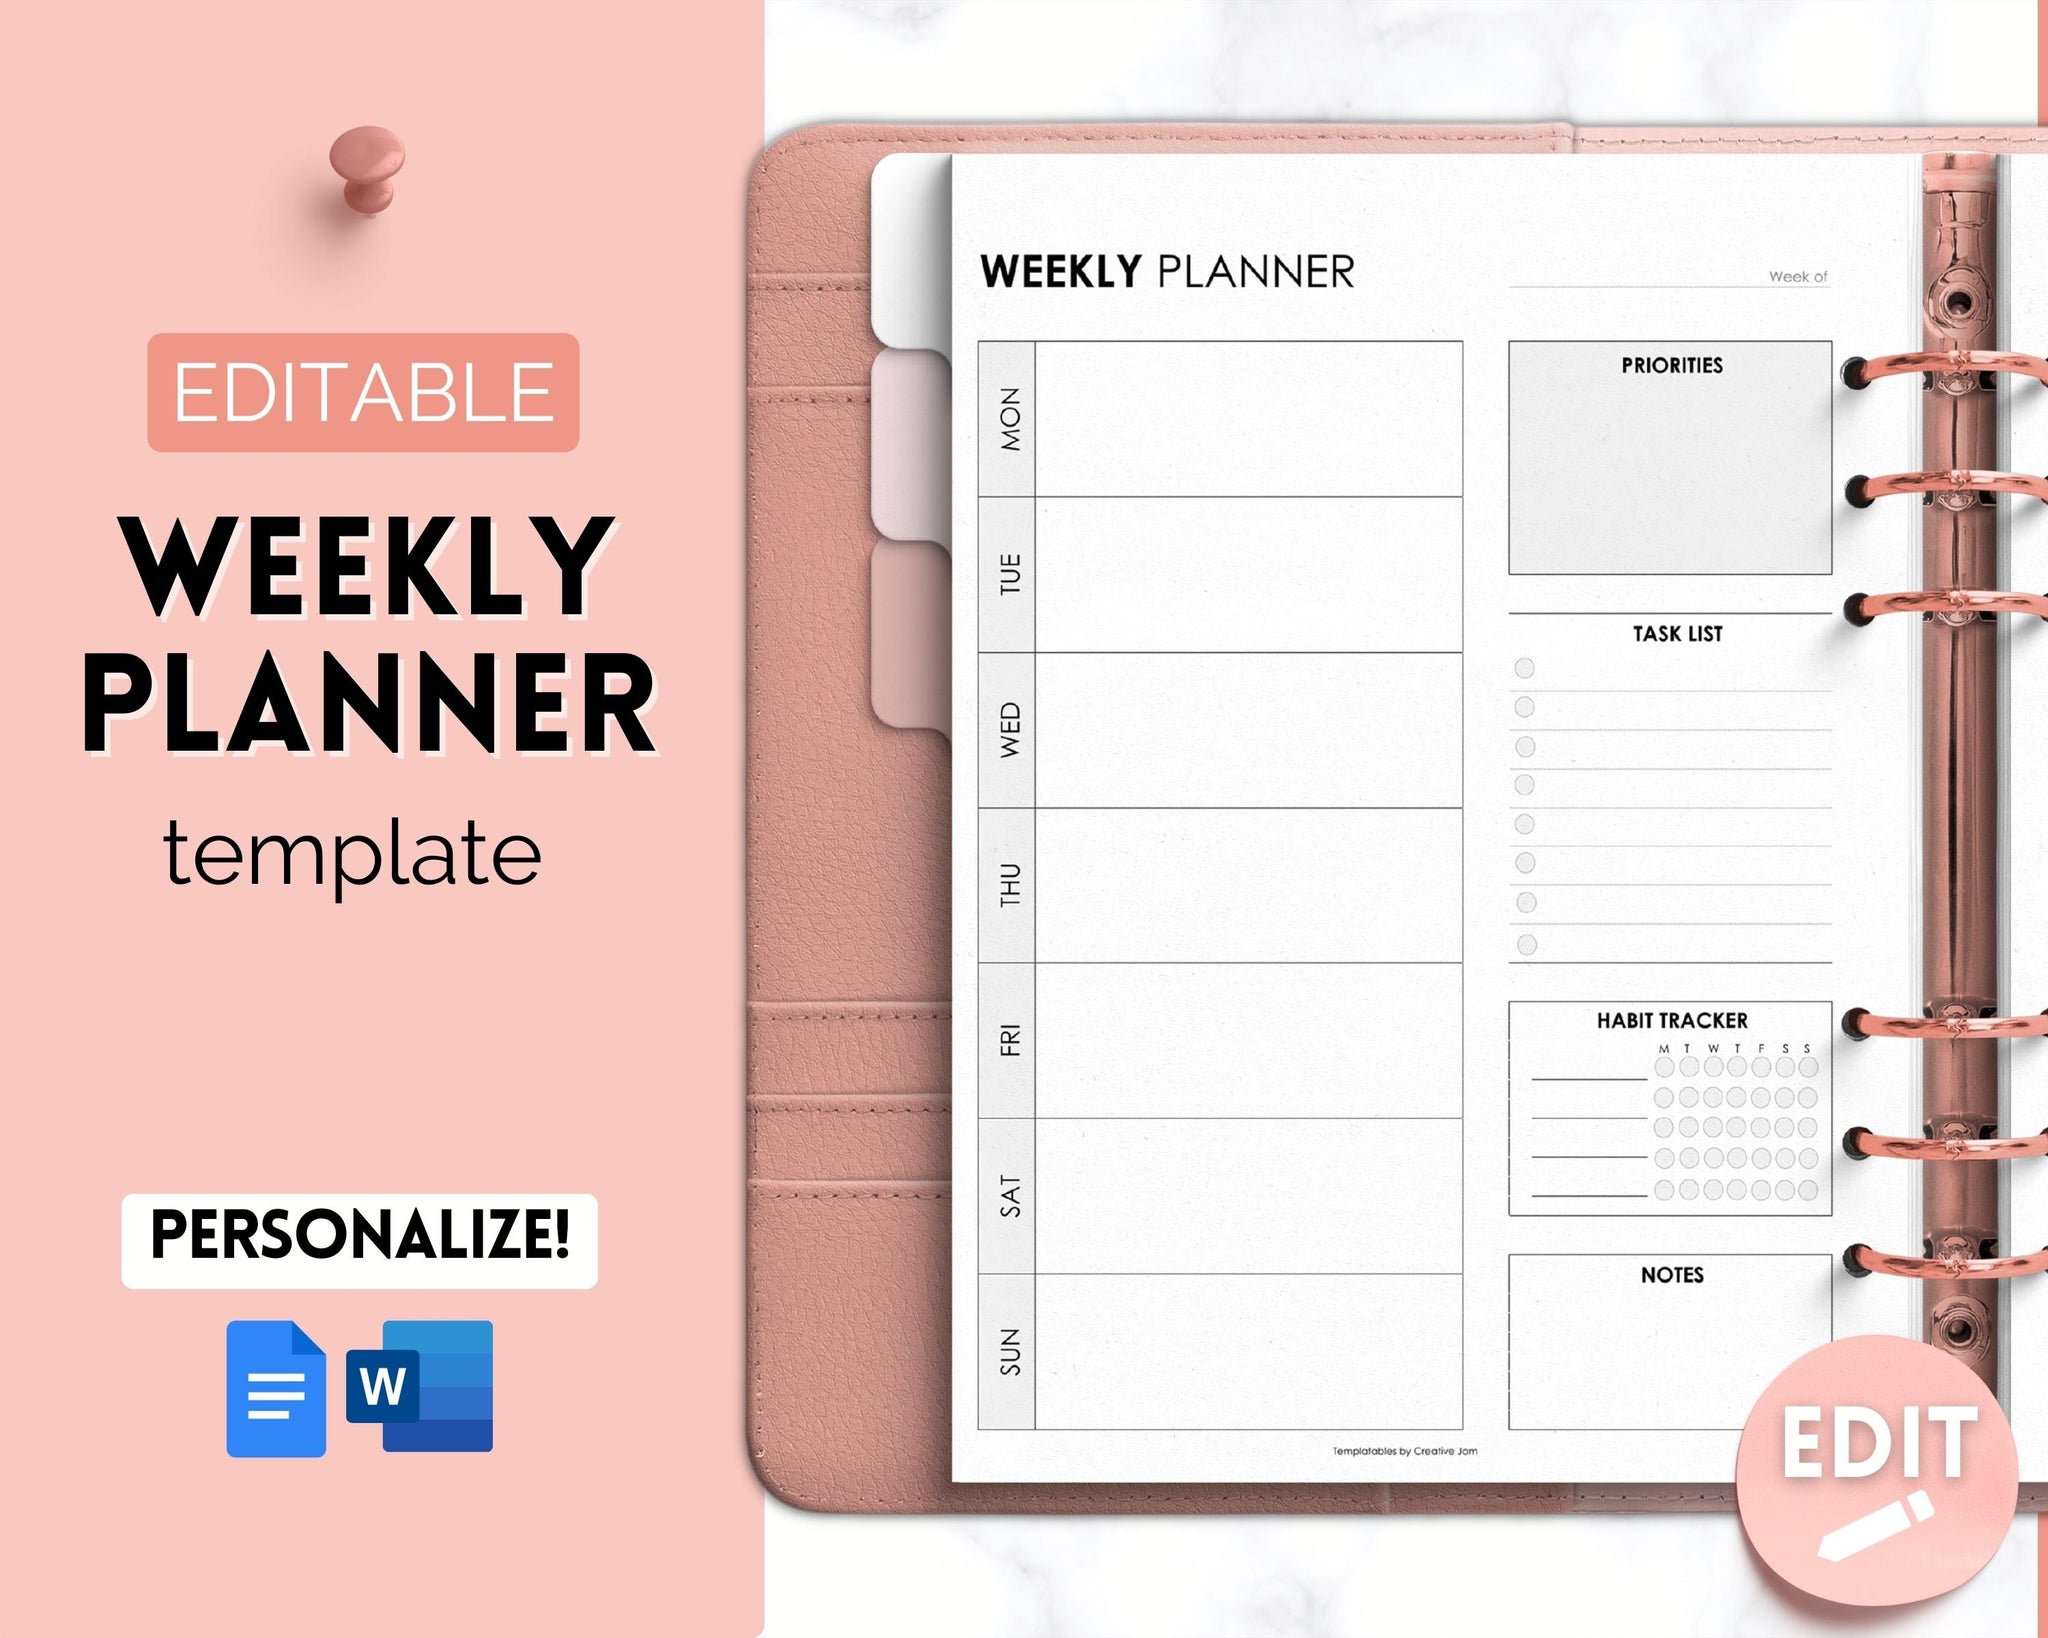 Printable Weekly To Do list Template, Weekly Agenda, Week At A Glance  Template, Week On One Page